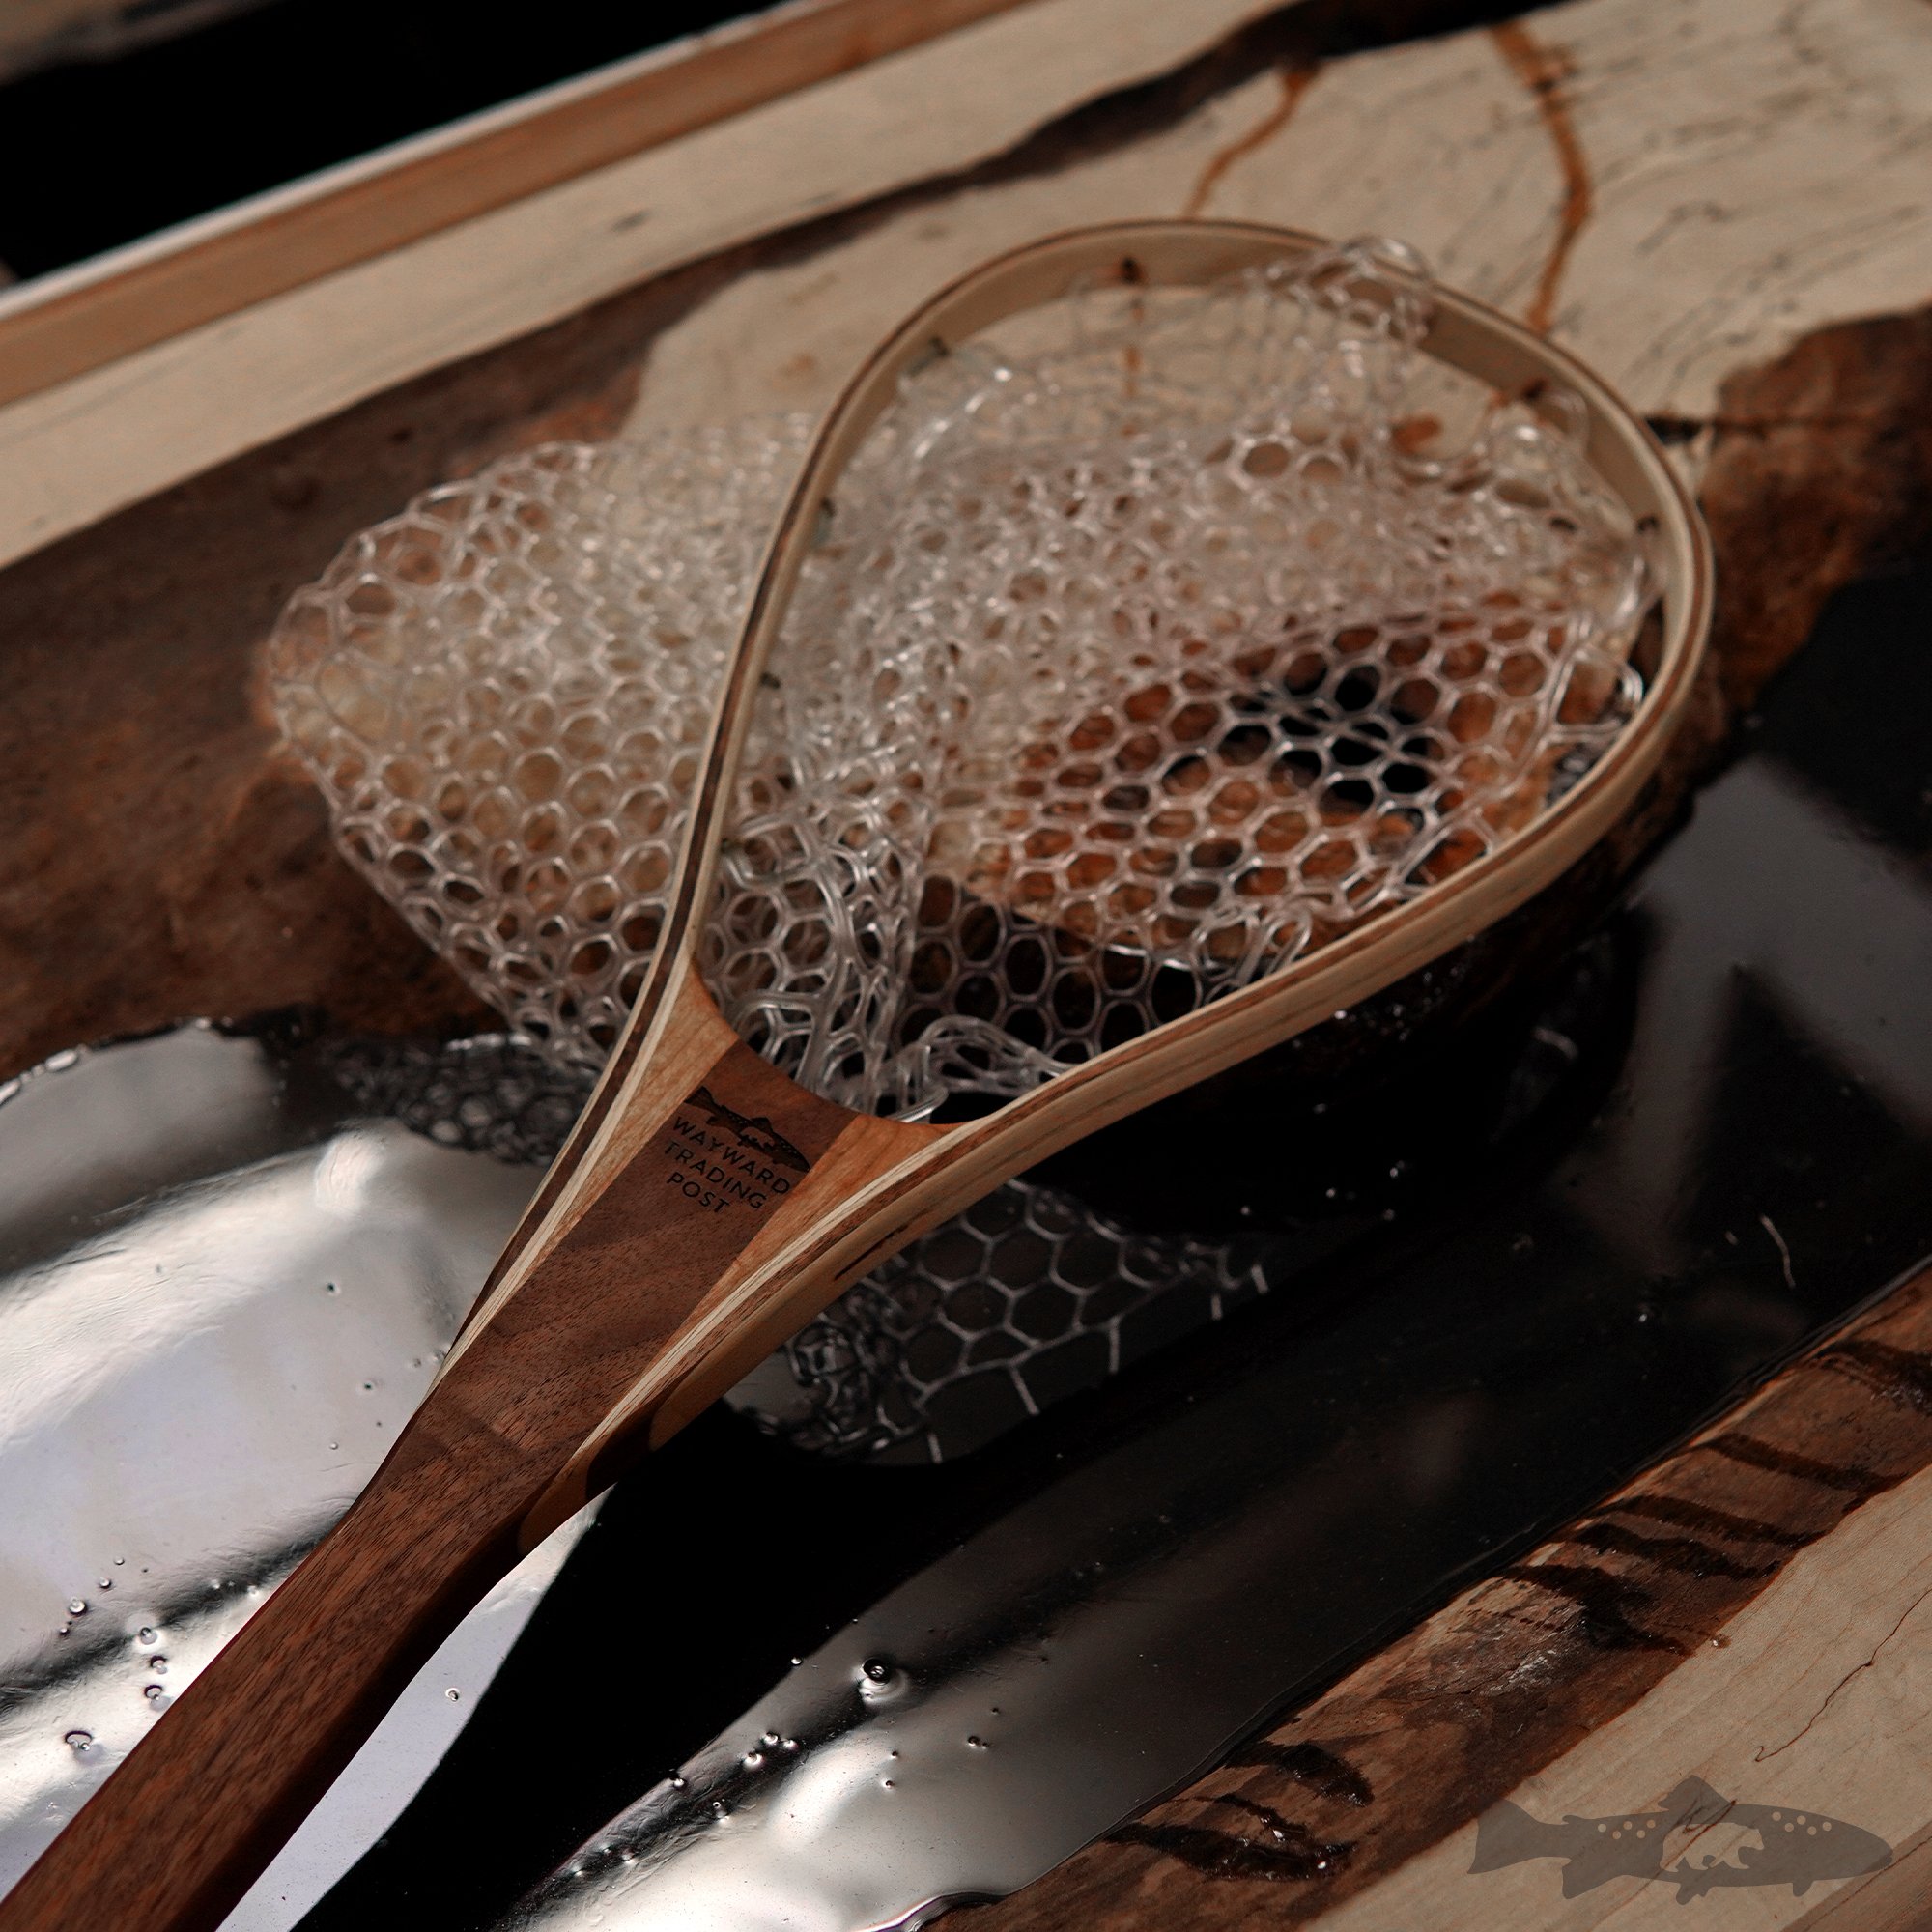 Classic Handcrafted Wood Landing Nets for Trout Fishing and Fly Fishing —  Wayward Handcrafted Fly Fishing Gear - made in Philadelphia USAWood Fly  Fishing net - Handcrafted Custom Fly Fishing net made